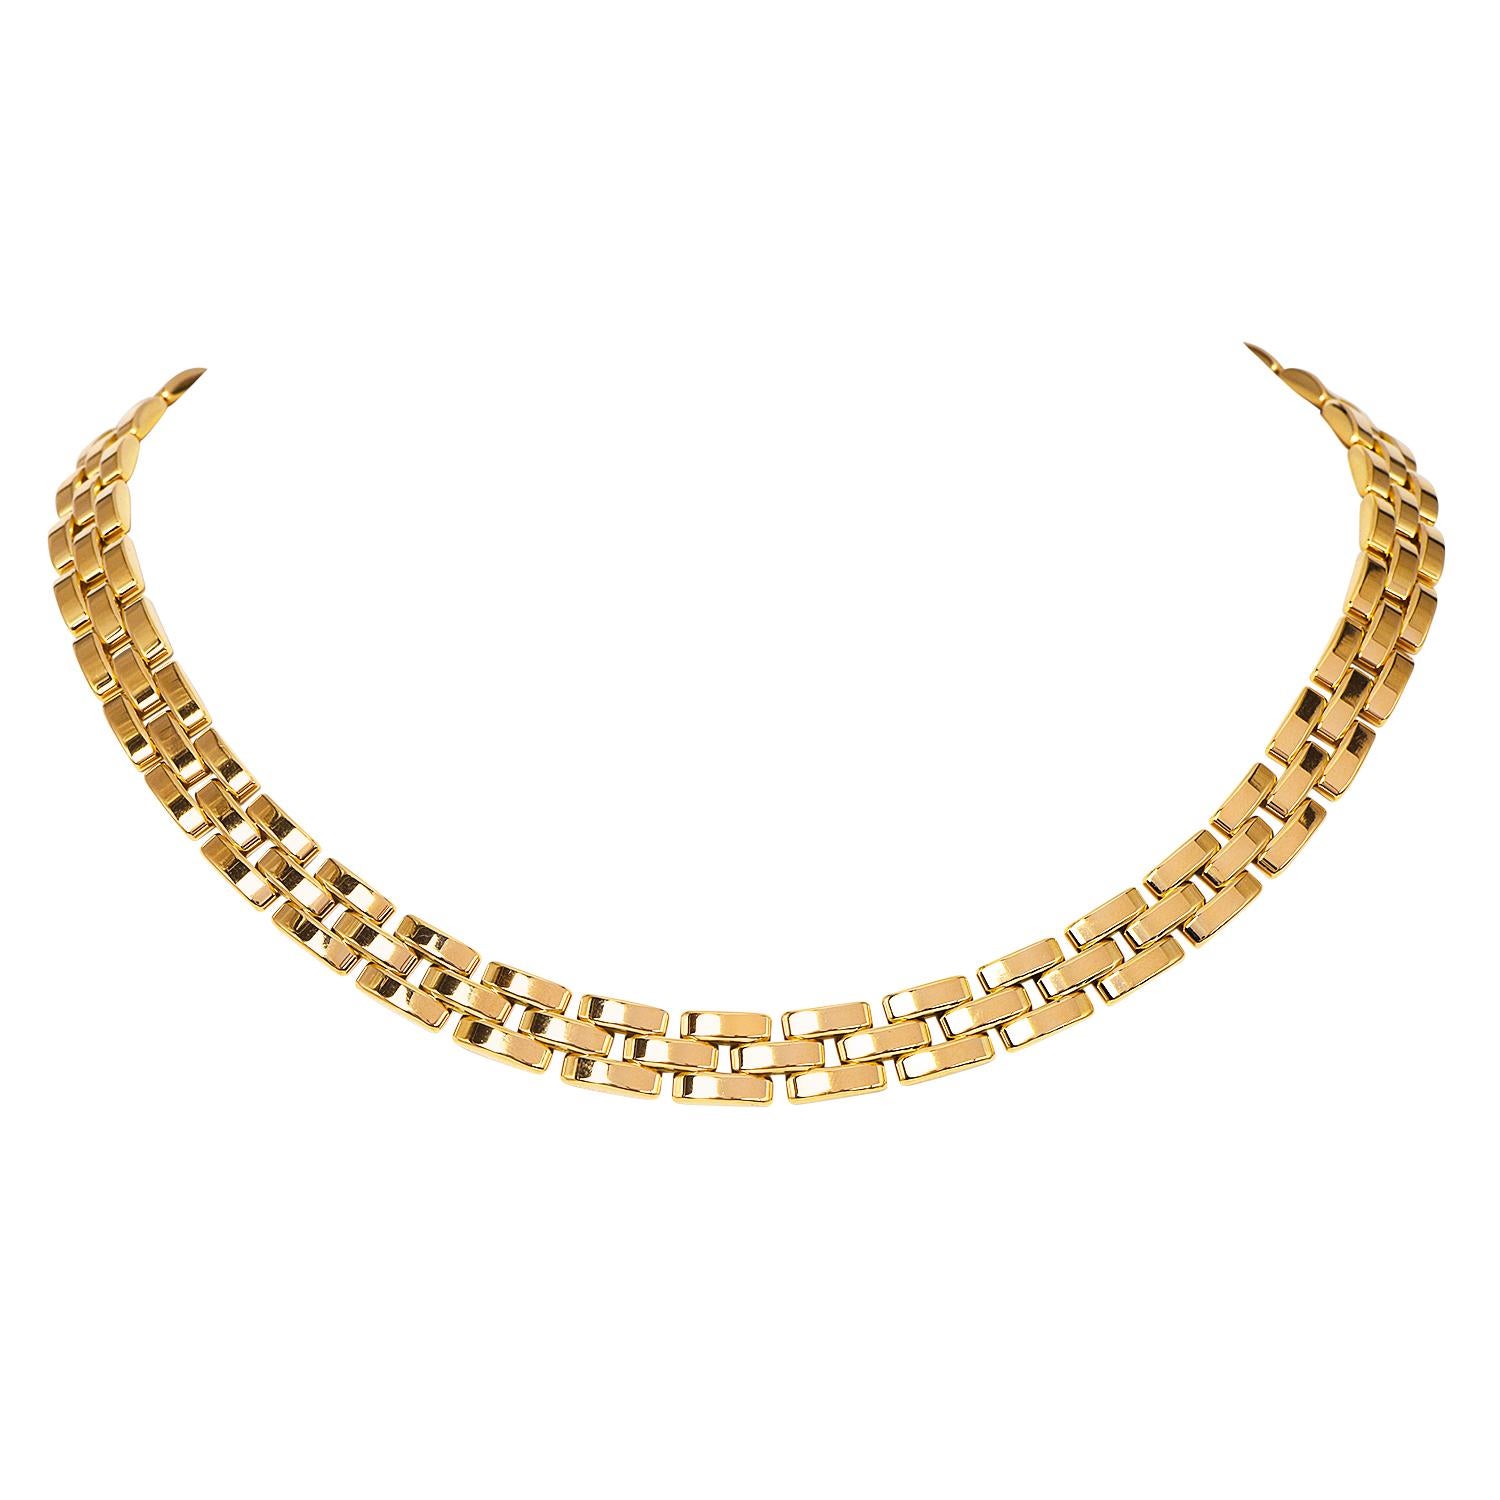 This outstanding example of Cartier's timeless classic look for unisex wear.

18K Yellow Gold Panthere Panther 3 Row Necklace by Cartier, with a highly polished finish.

This exquisite necklace weighs a total of approx. 84.0 grams.

Manufactured